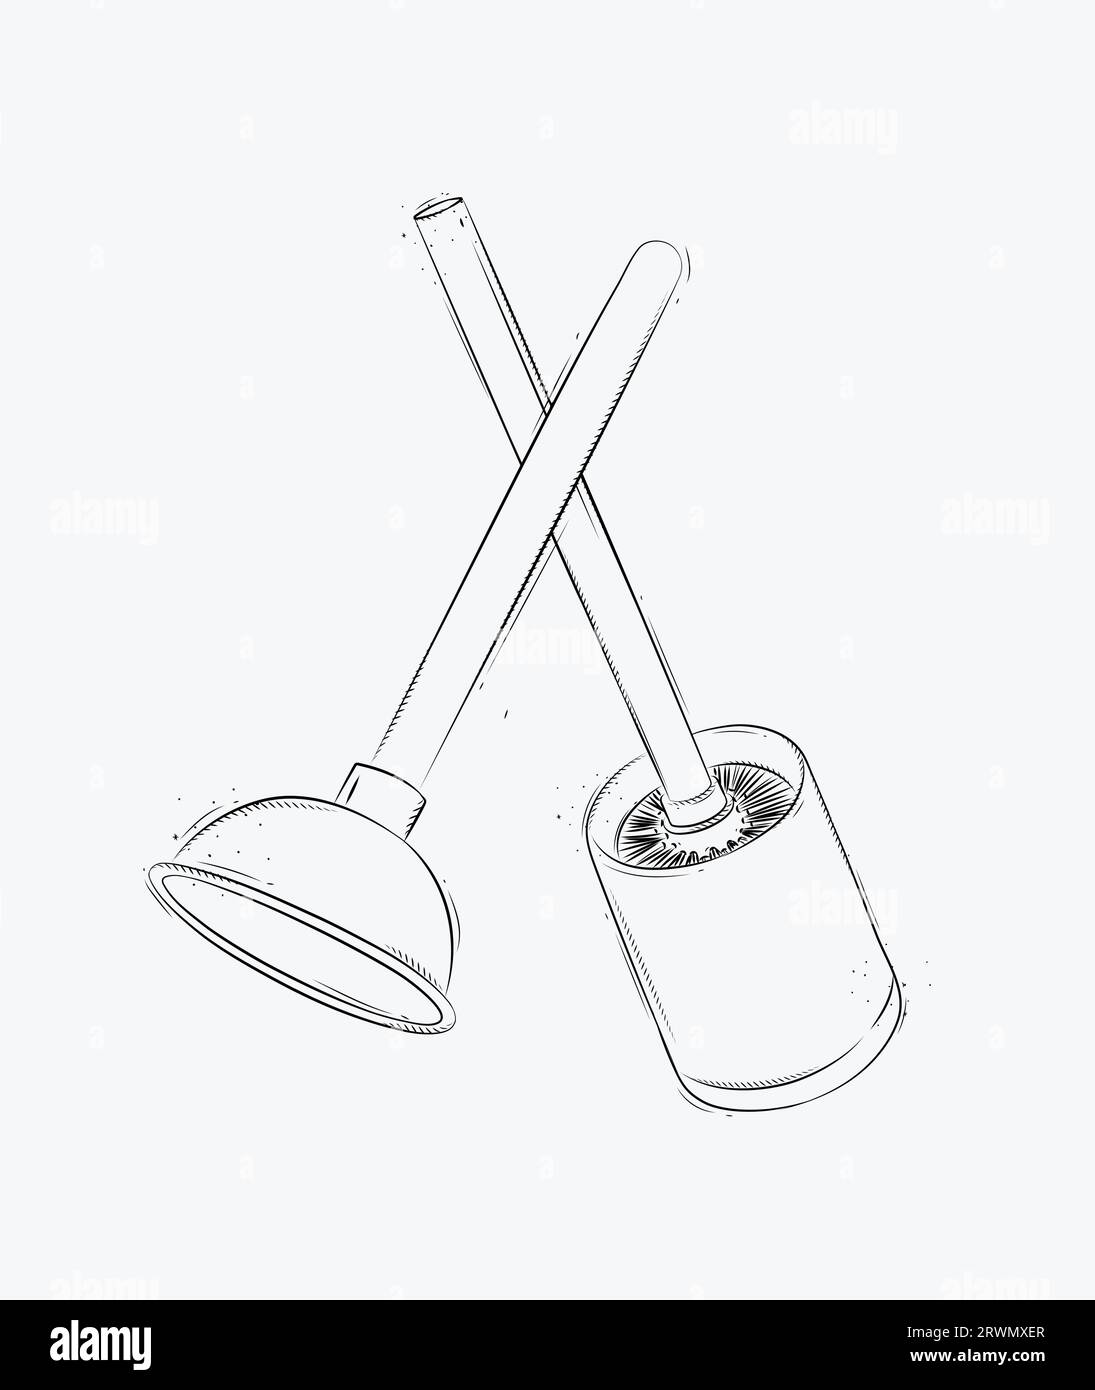 Cleaning tools toilet brush and plunger drawing in graphic style on white background Stock Vector